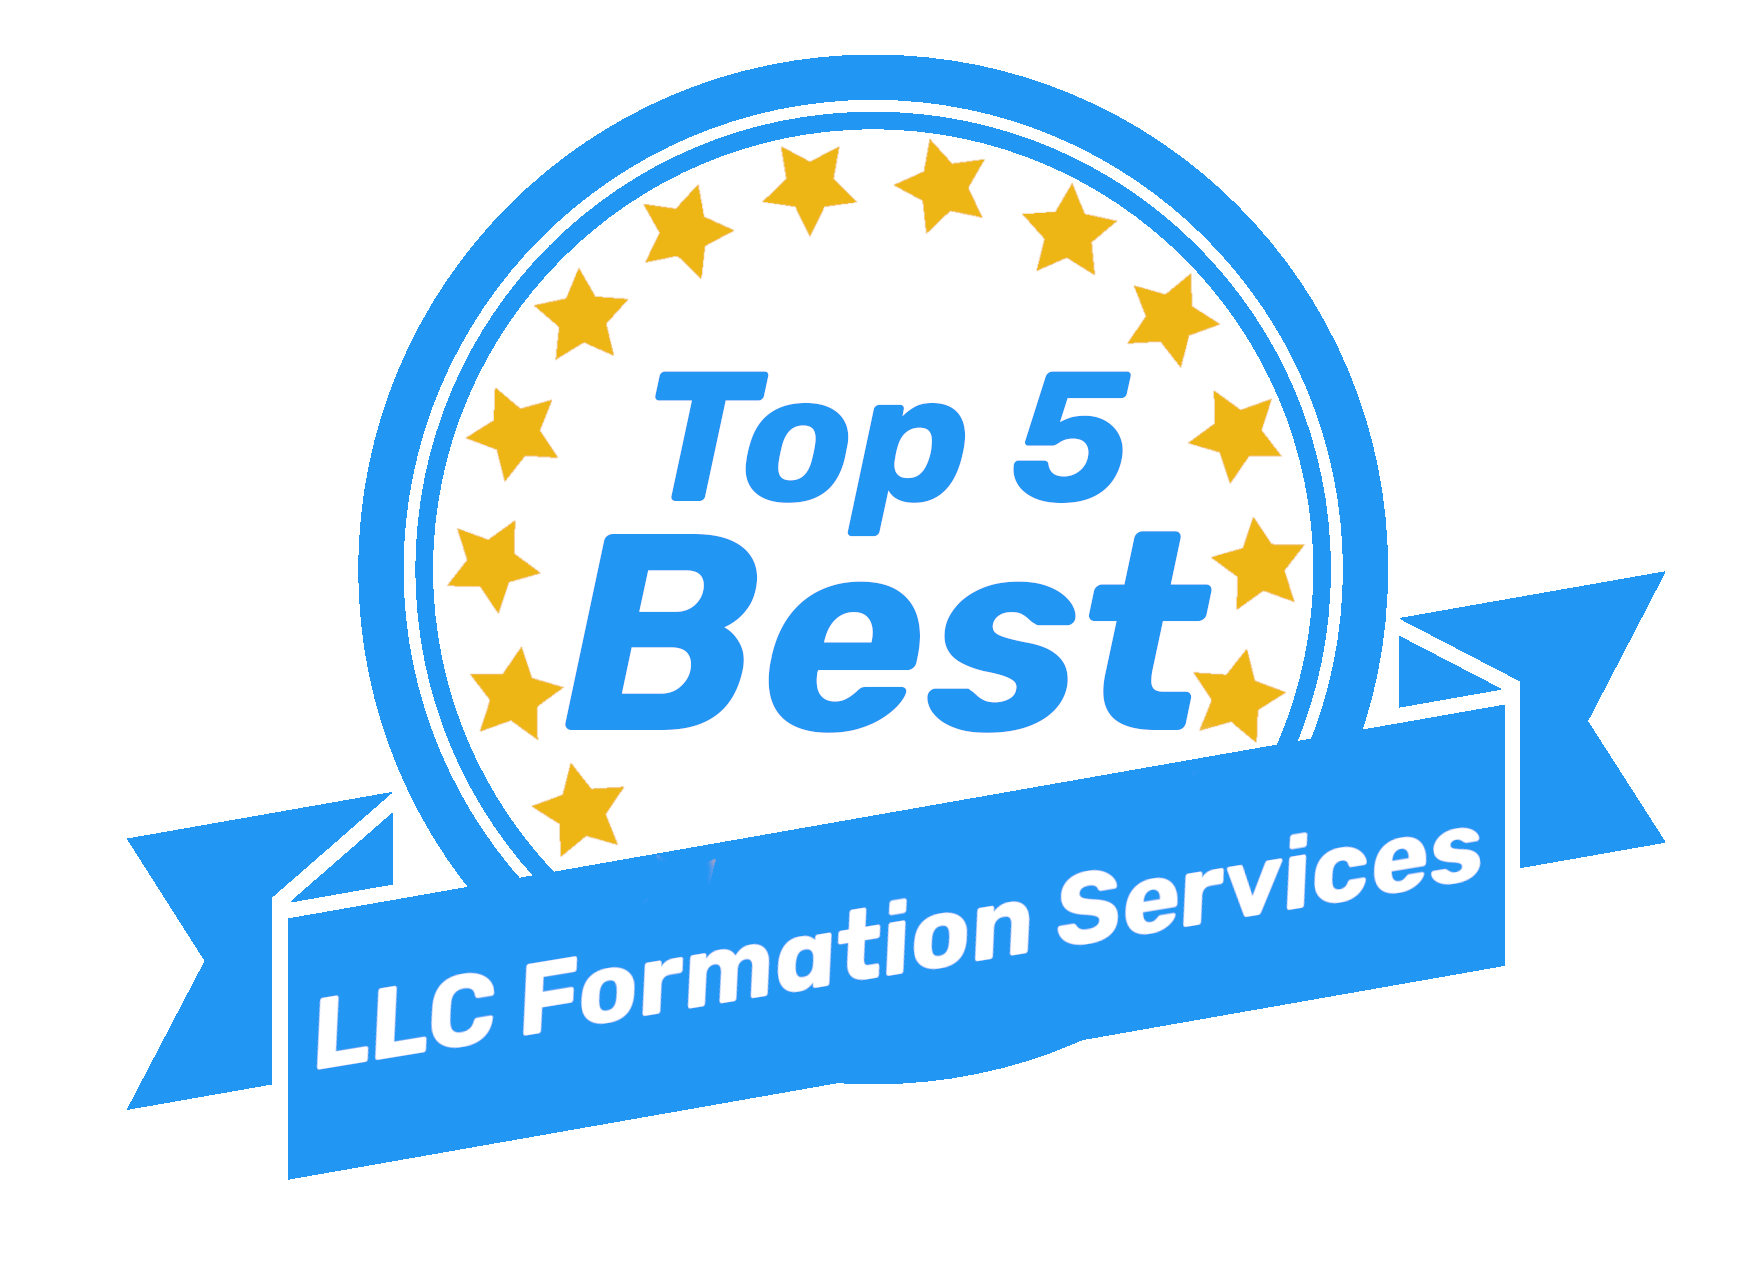 Top 5 Best LLC Services Steps to Starting a Business